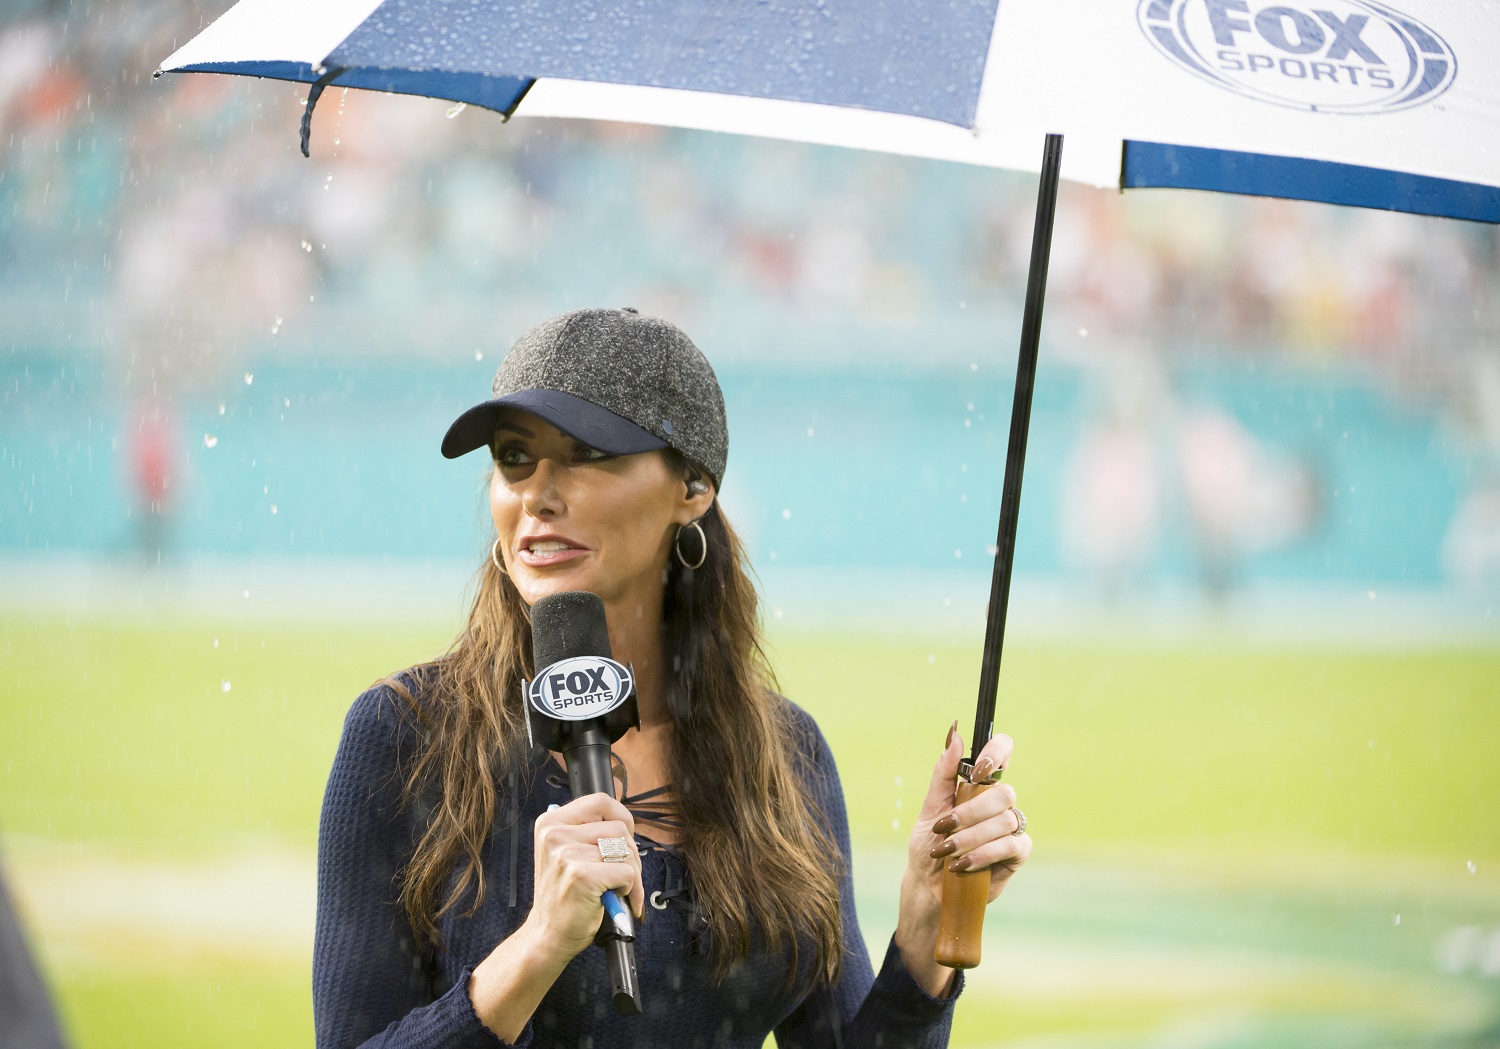 Holly Sonders was a top golfer in the junior ranks who attended Michigan State on scholarship before beginning a career in broadcasting. | Doug Murray/Icon Sportswire via Getty Images